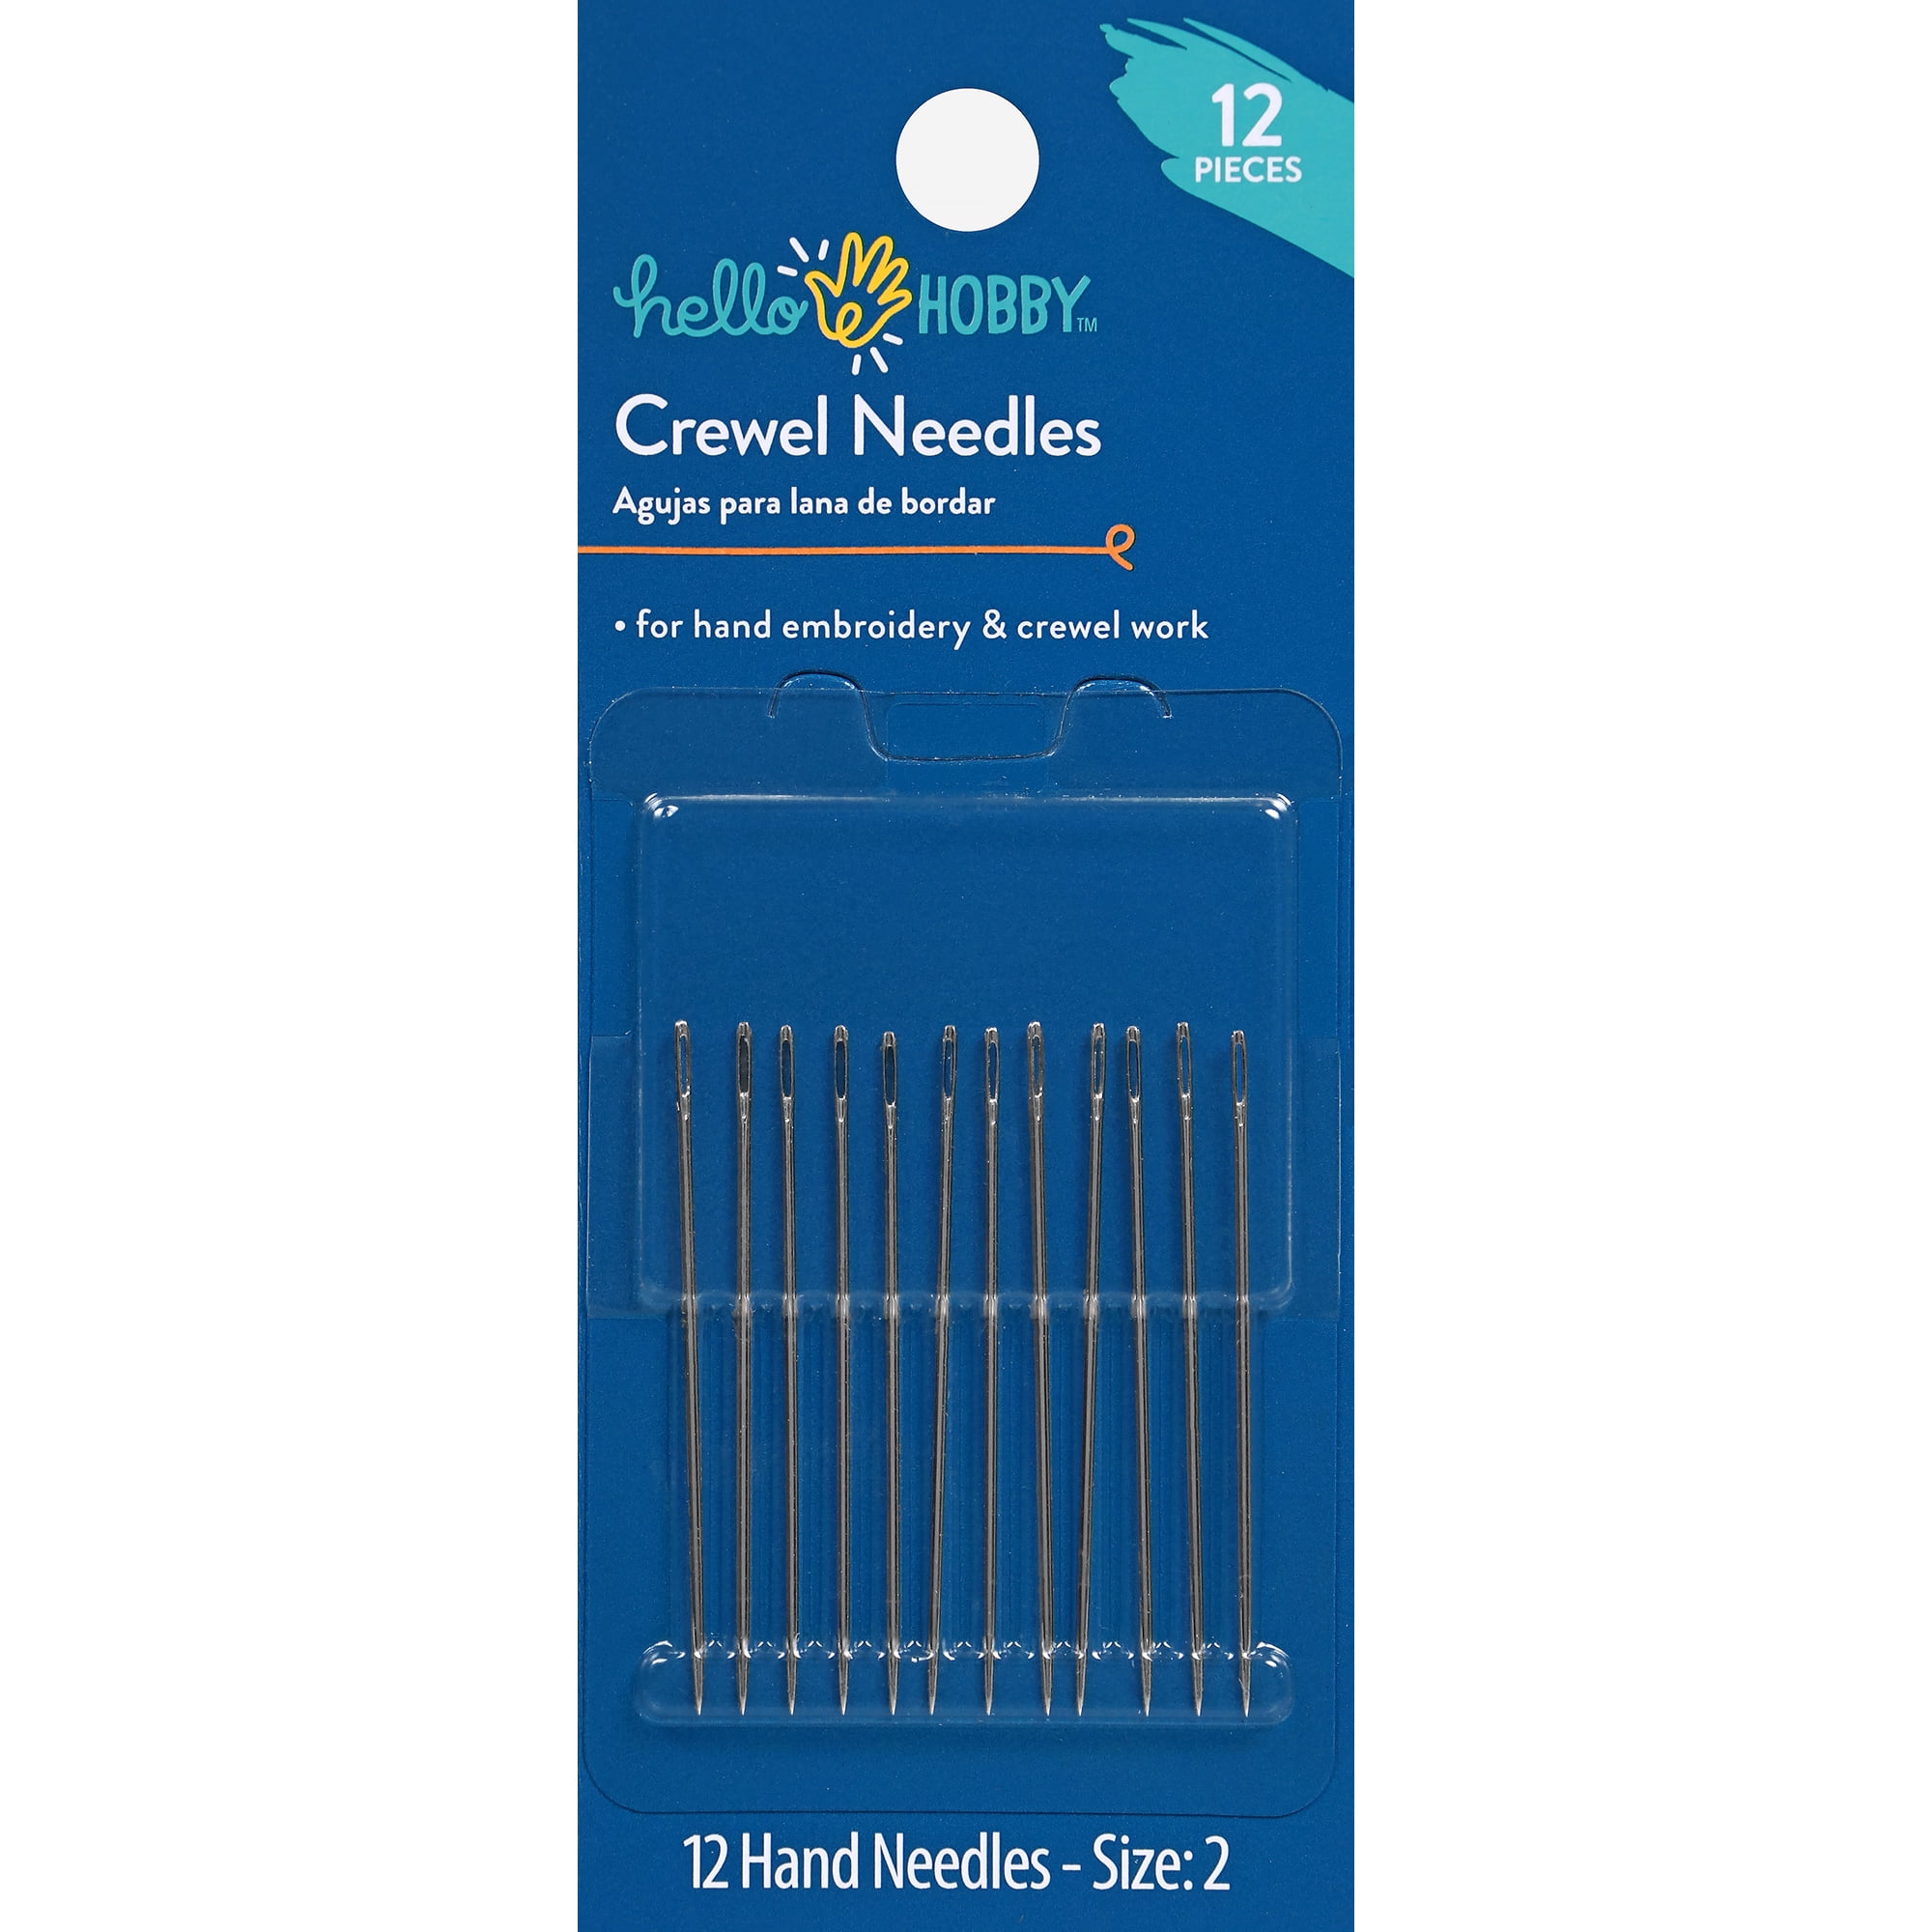 S. Thomas & Sons Crewel Embroidery Hand Needles - WAWAK Sewing Supplies